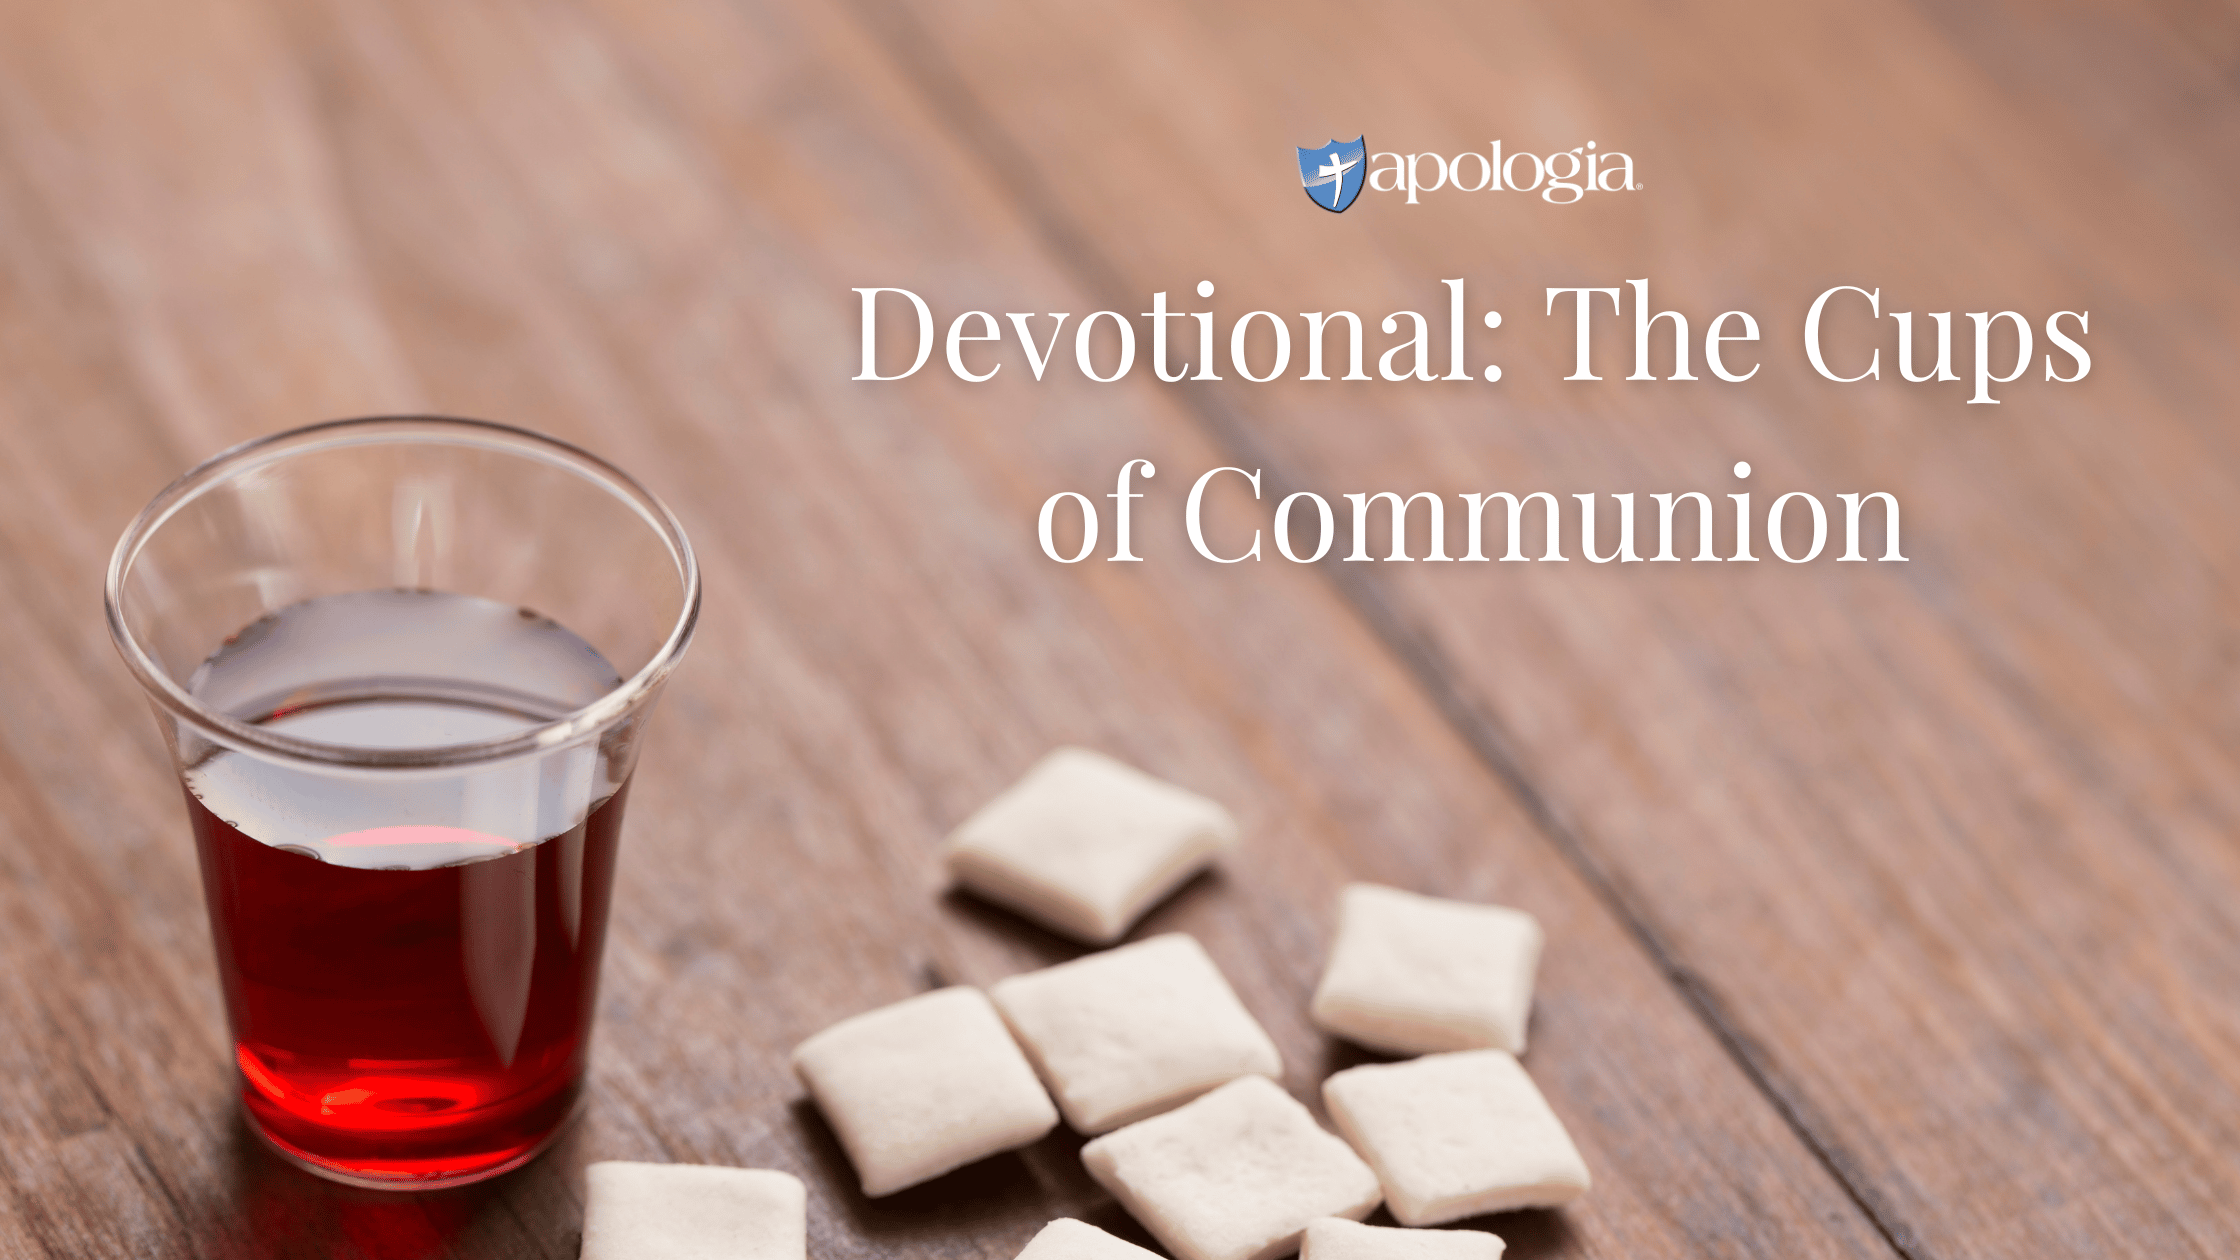 Devotional: The Cups of Communion